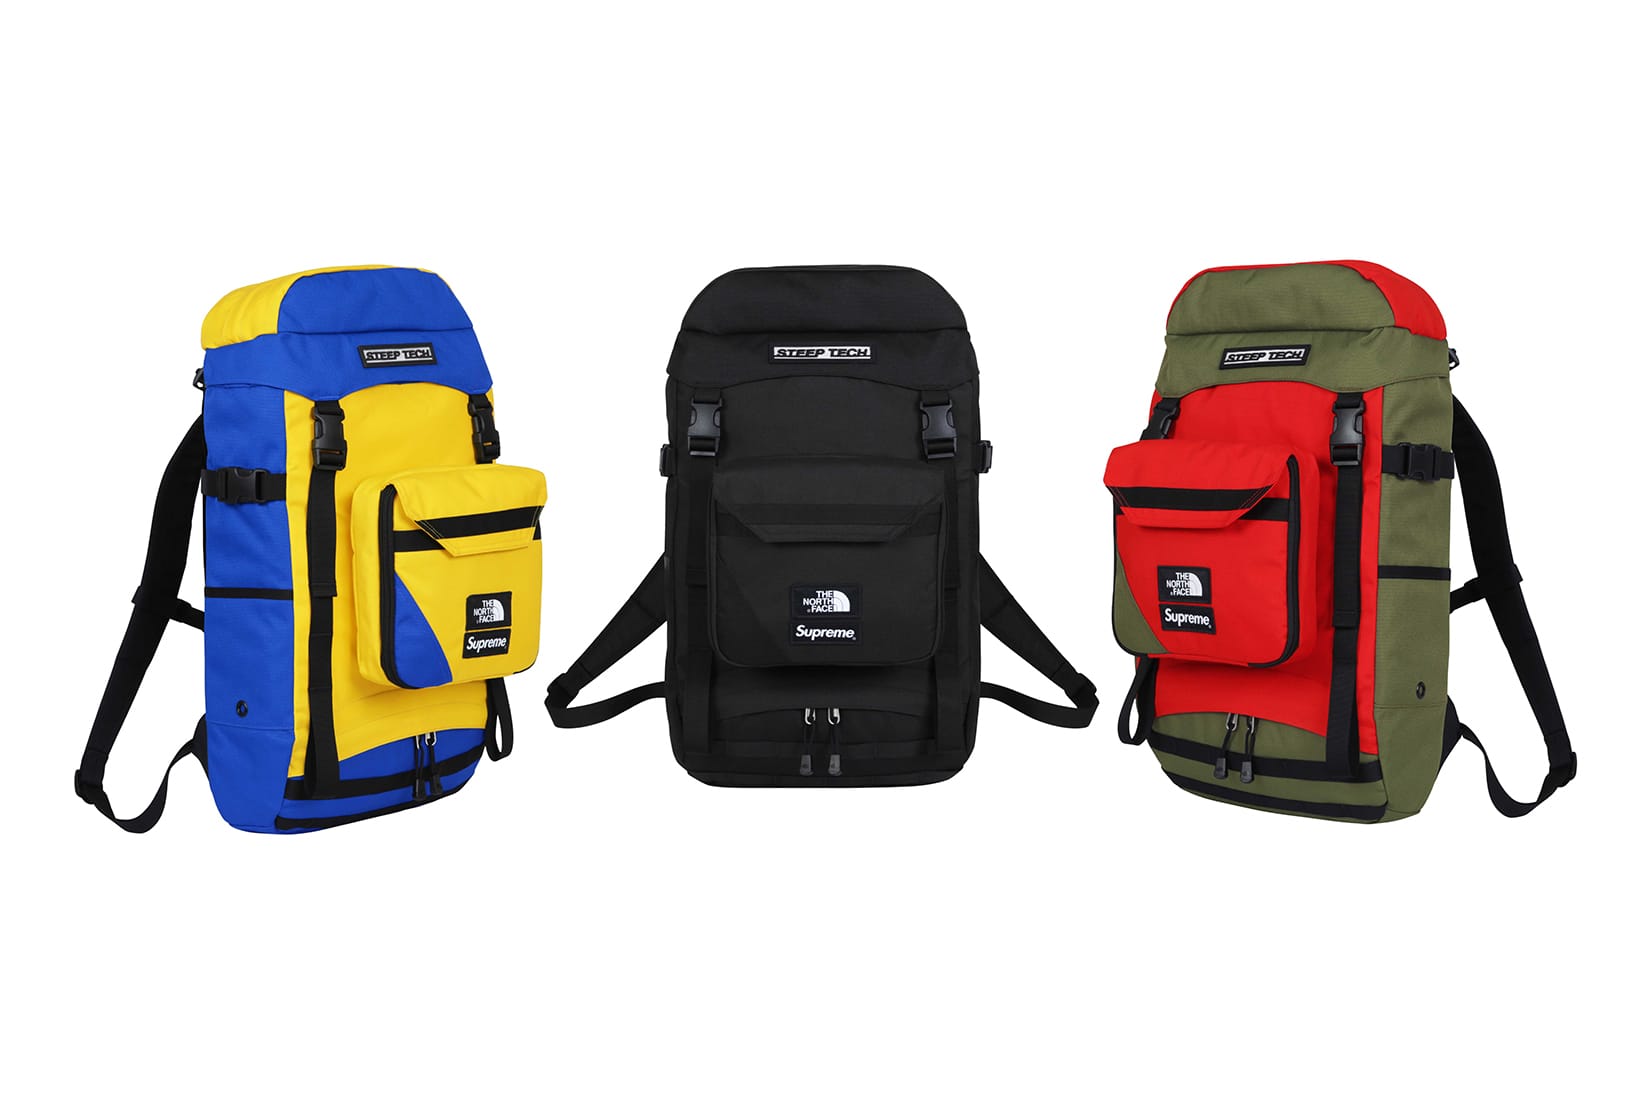 supreme the north face steep tech backpack black